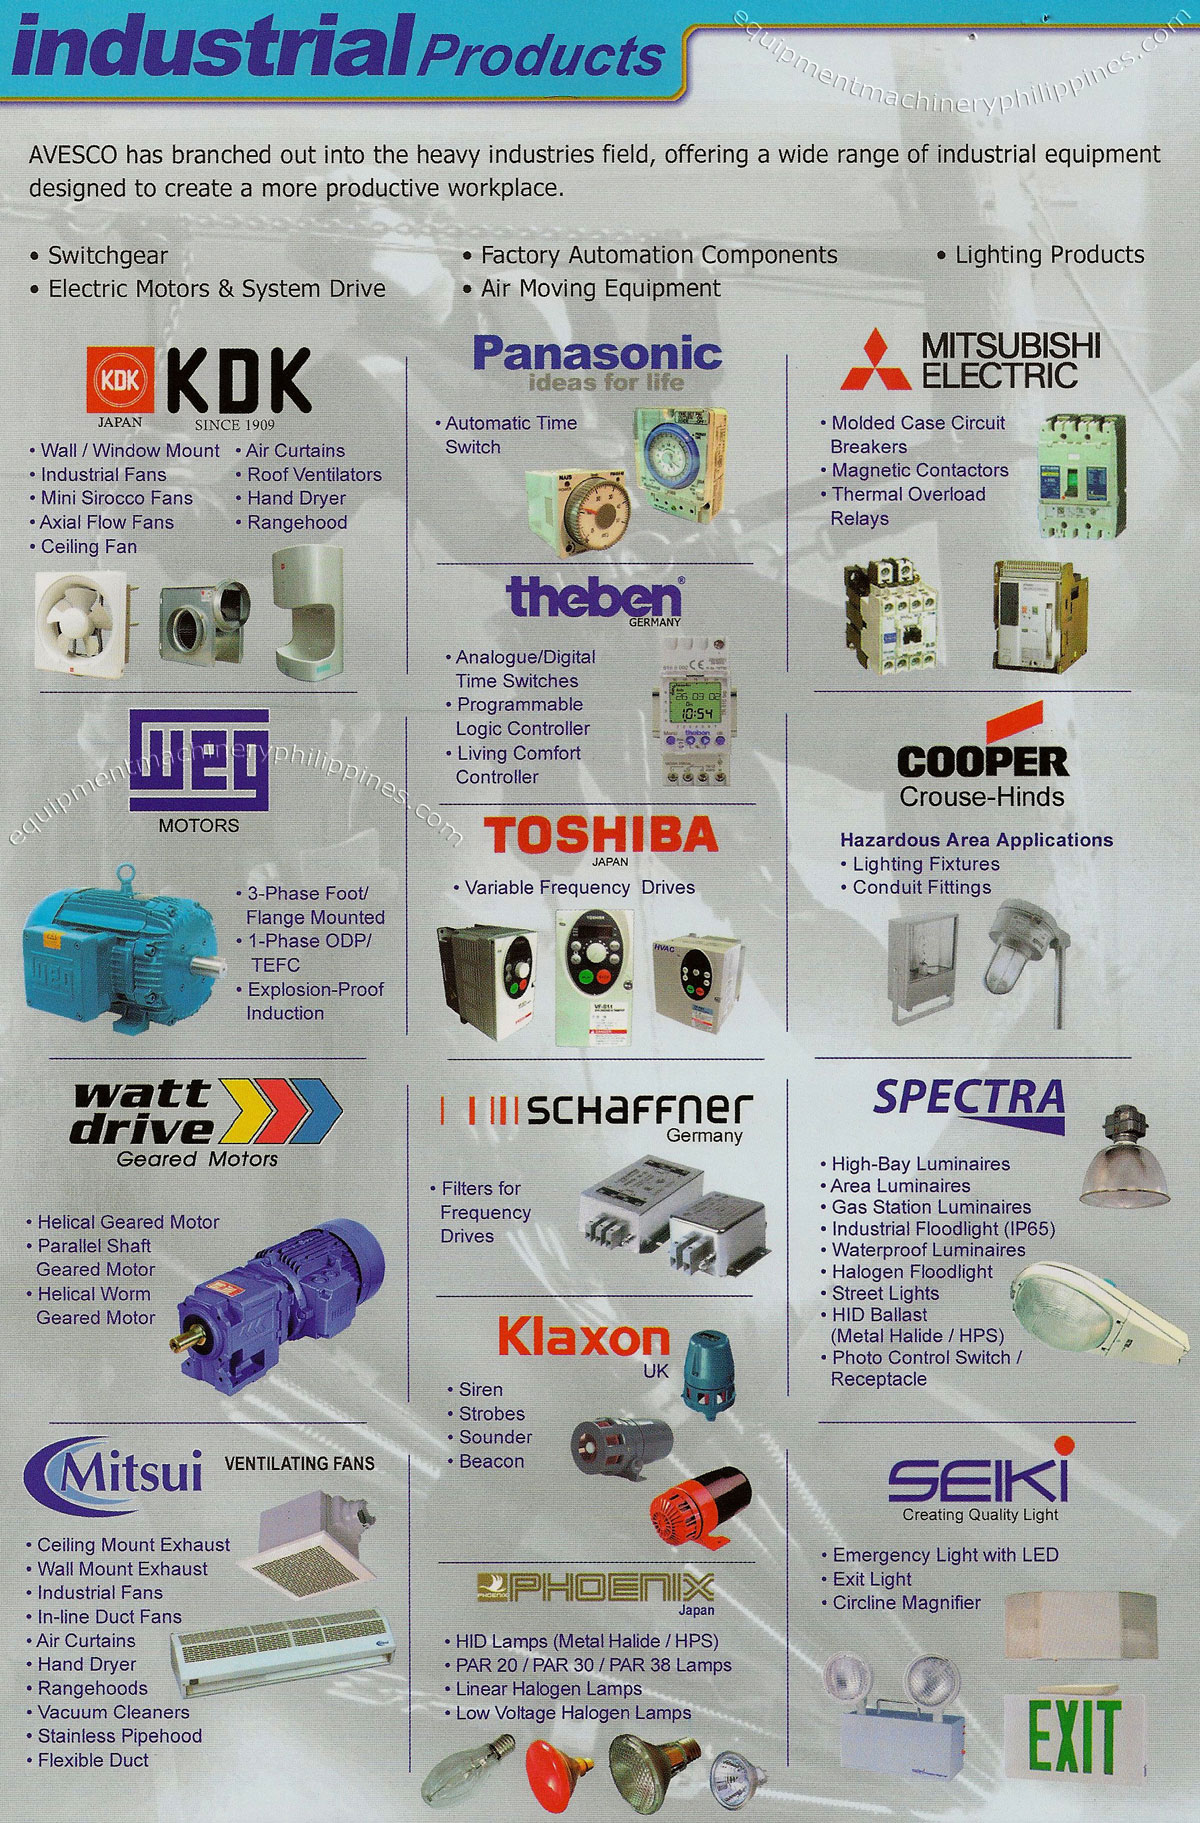 Switchgear, Electric Motors and System Drive, Factory Automation, Air Moving Equipment, Lighting